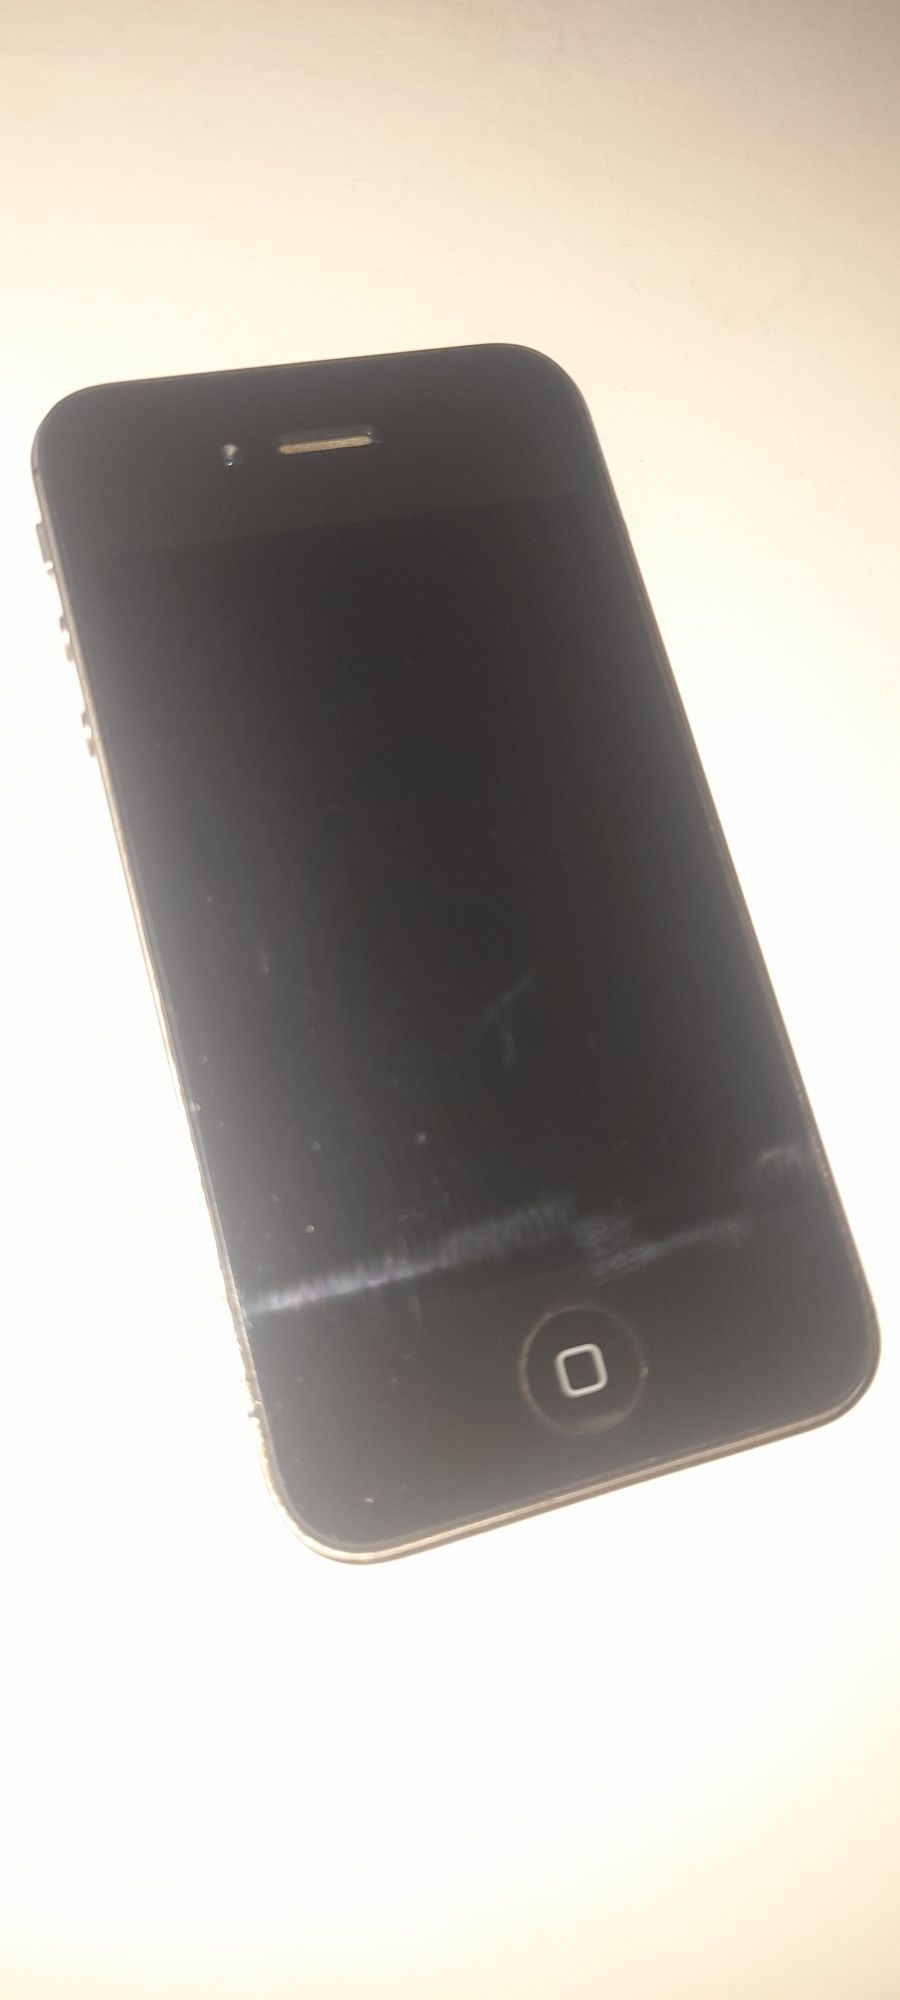 Apple Iphone 4s a1387